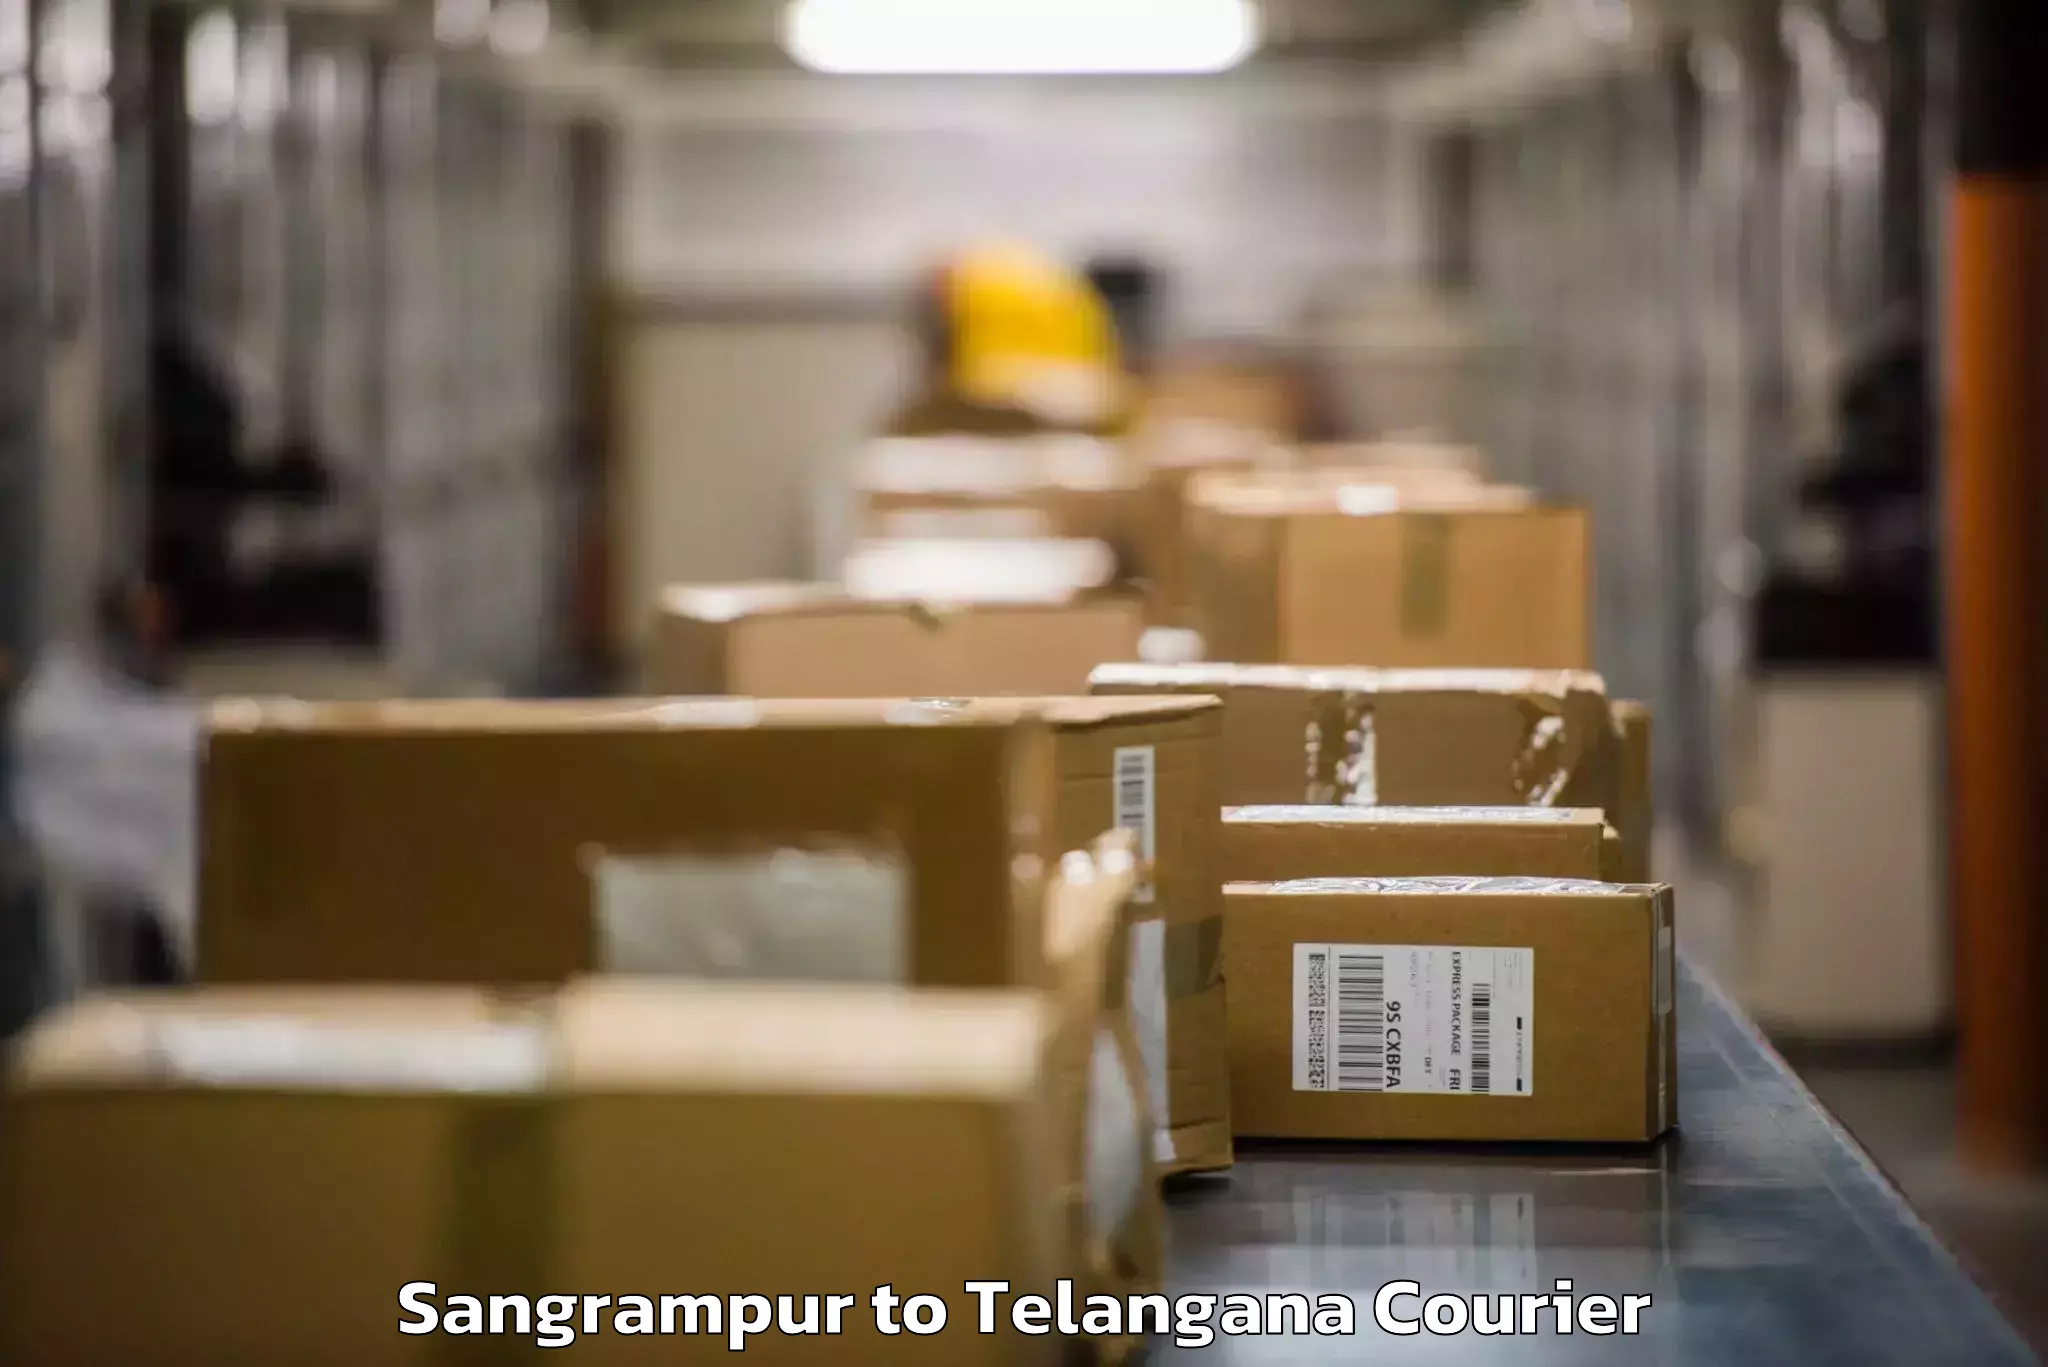 Urgent luggage shipment Sangrampur to Sultanabad